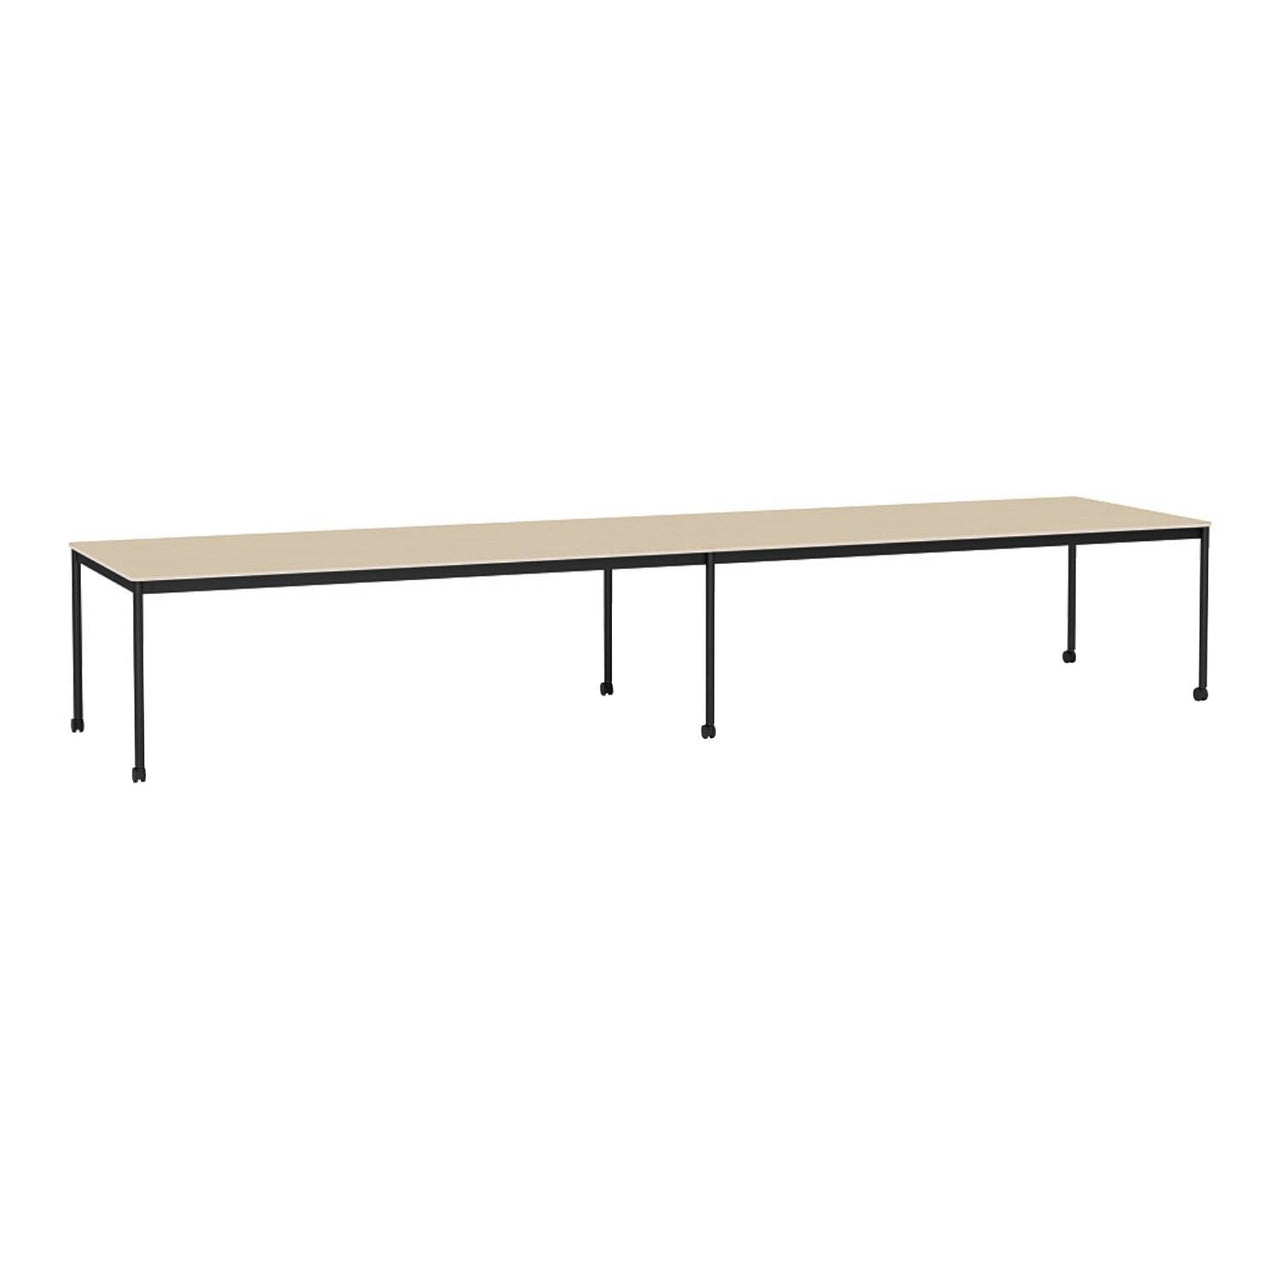 Base Table with Castors: Large + 173.2